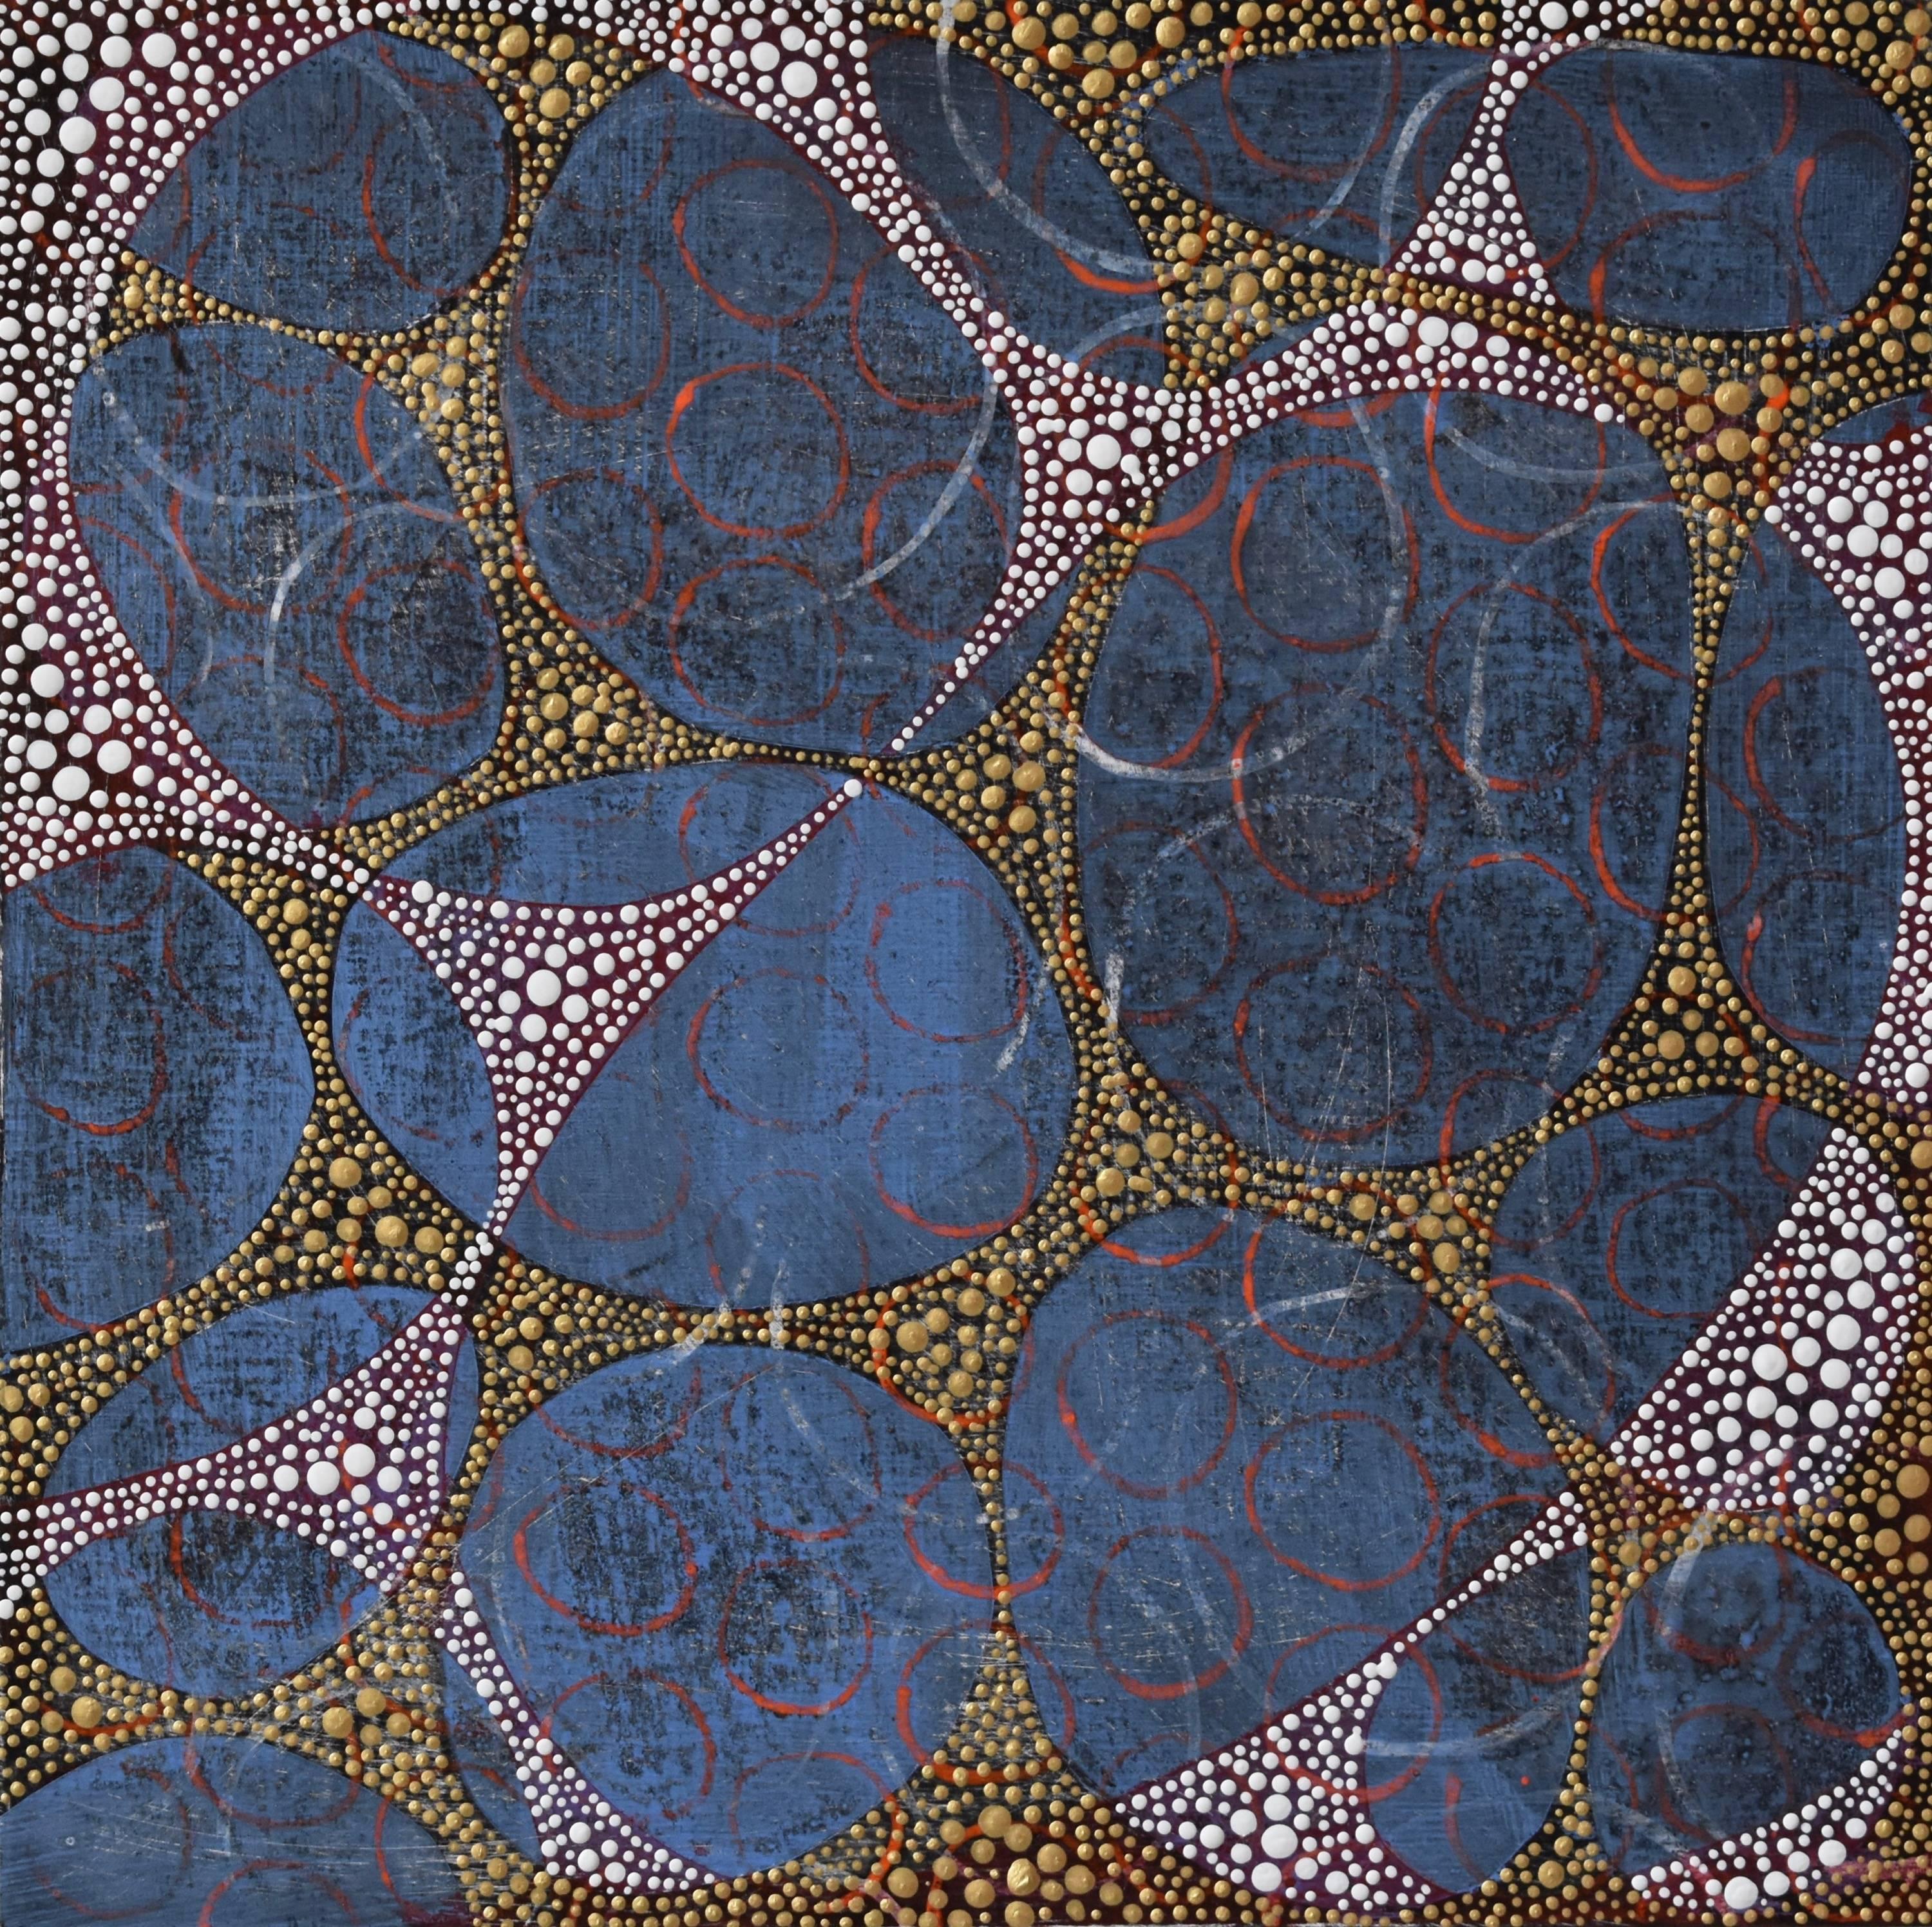 "Between 1", abstract, webs, gold, blue, white, orange, acrylic painting - Painting by Denise Driscoll